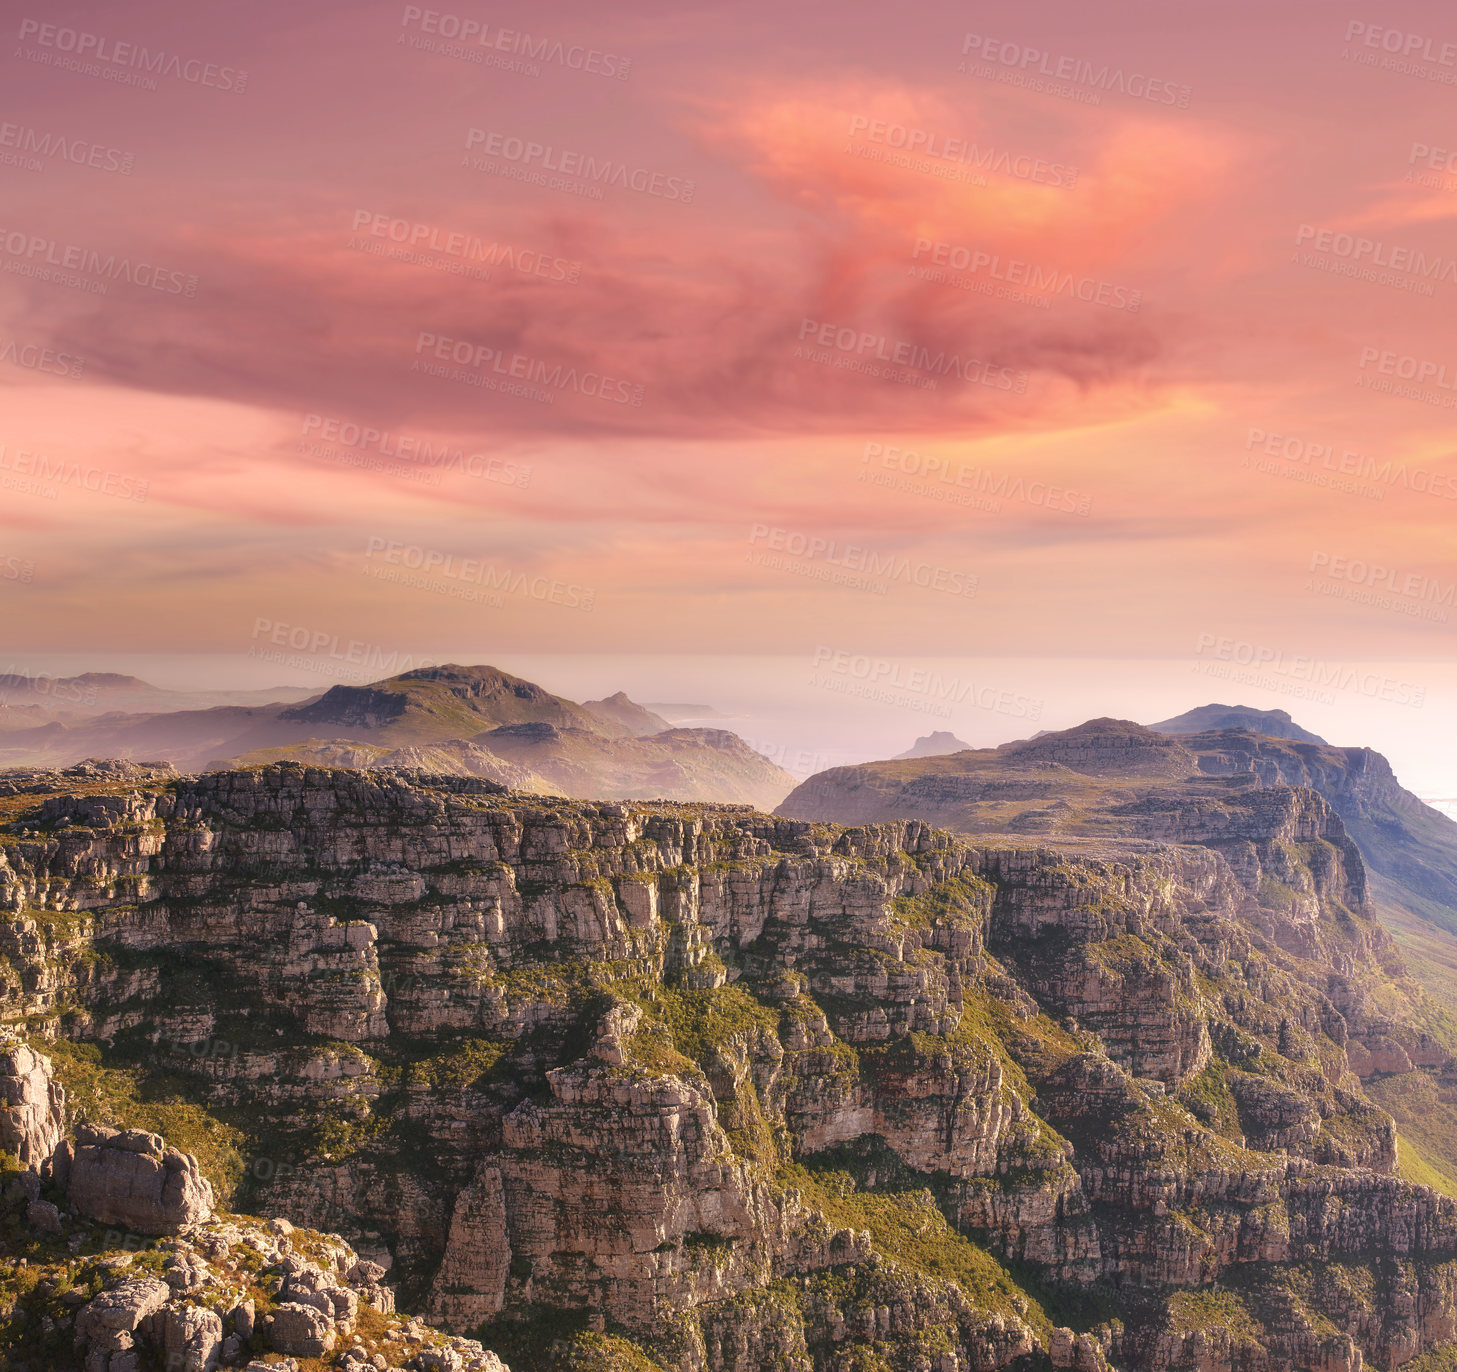 Buy stock photo View from Table Mountain - twelve apostles mountain. Cape Town, Western Cape